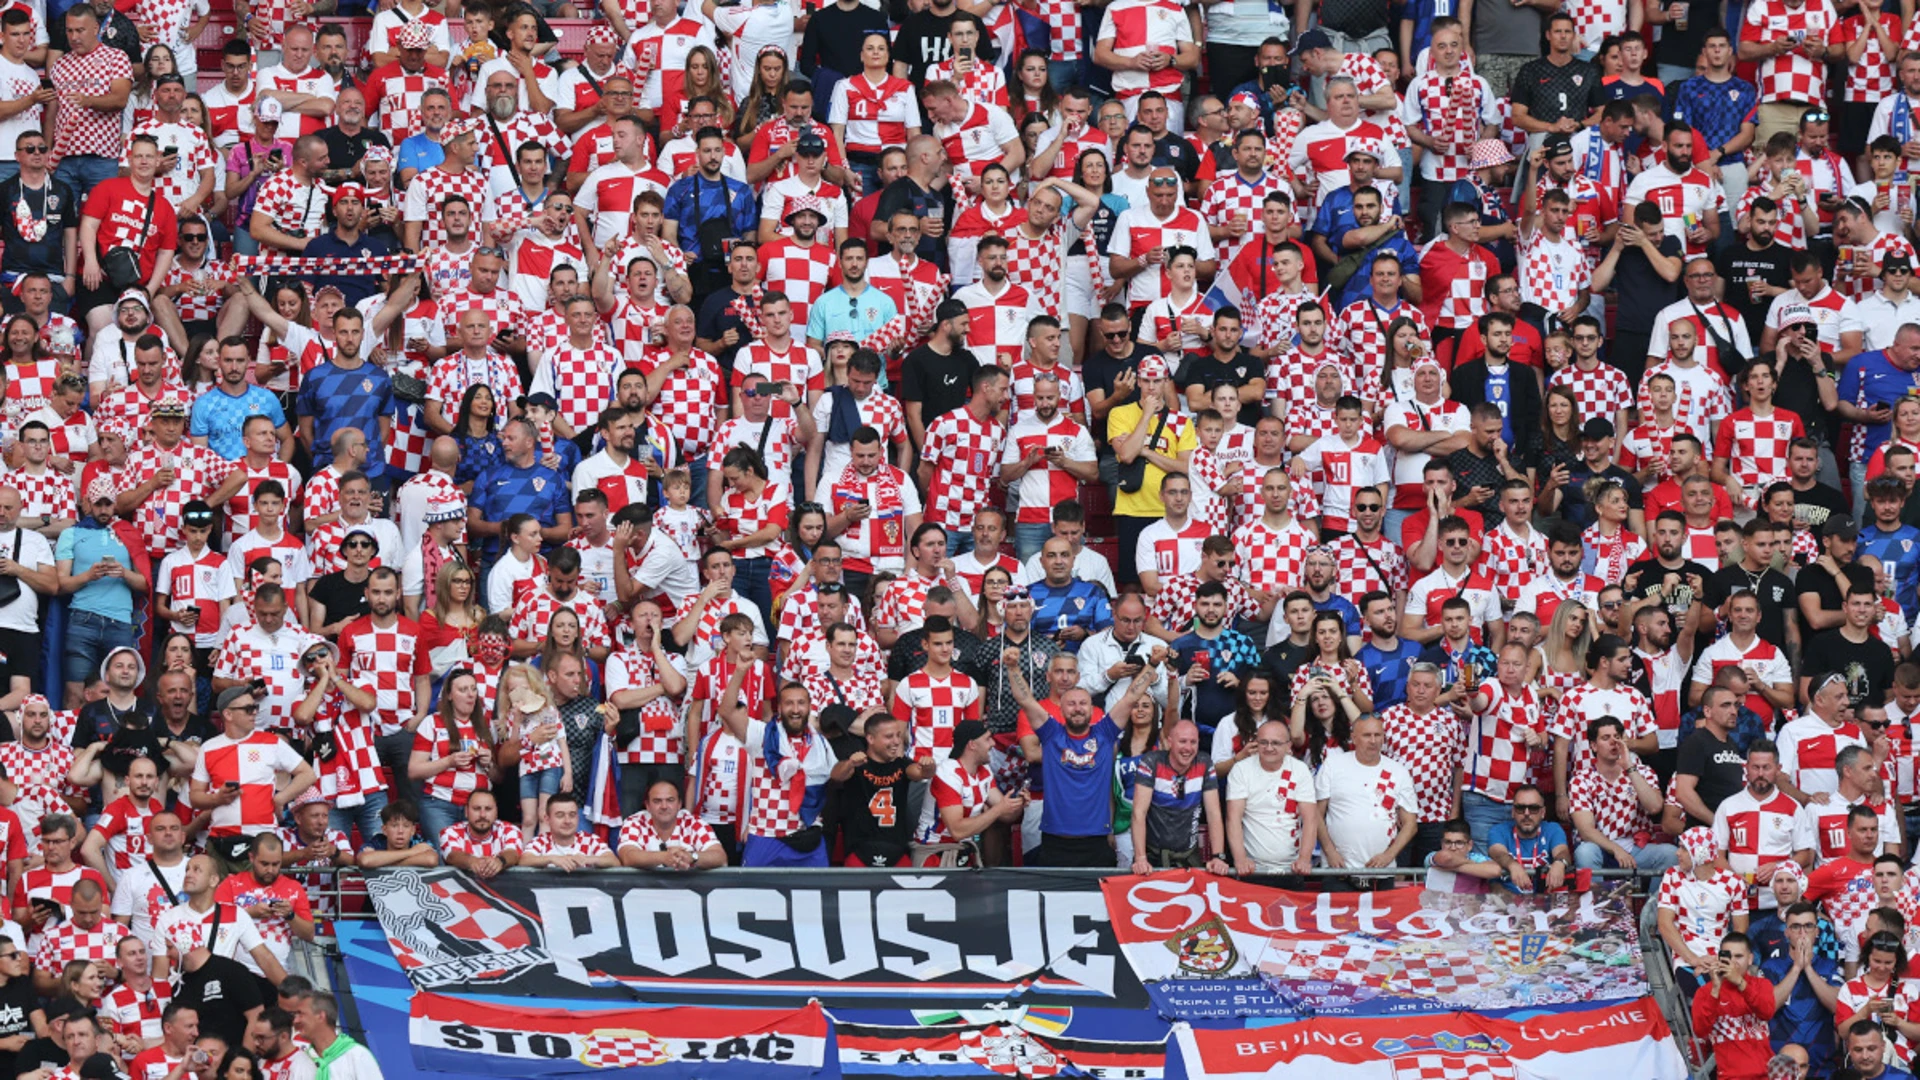 Croatia fined for fan misconduct, arrests made around Italy game